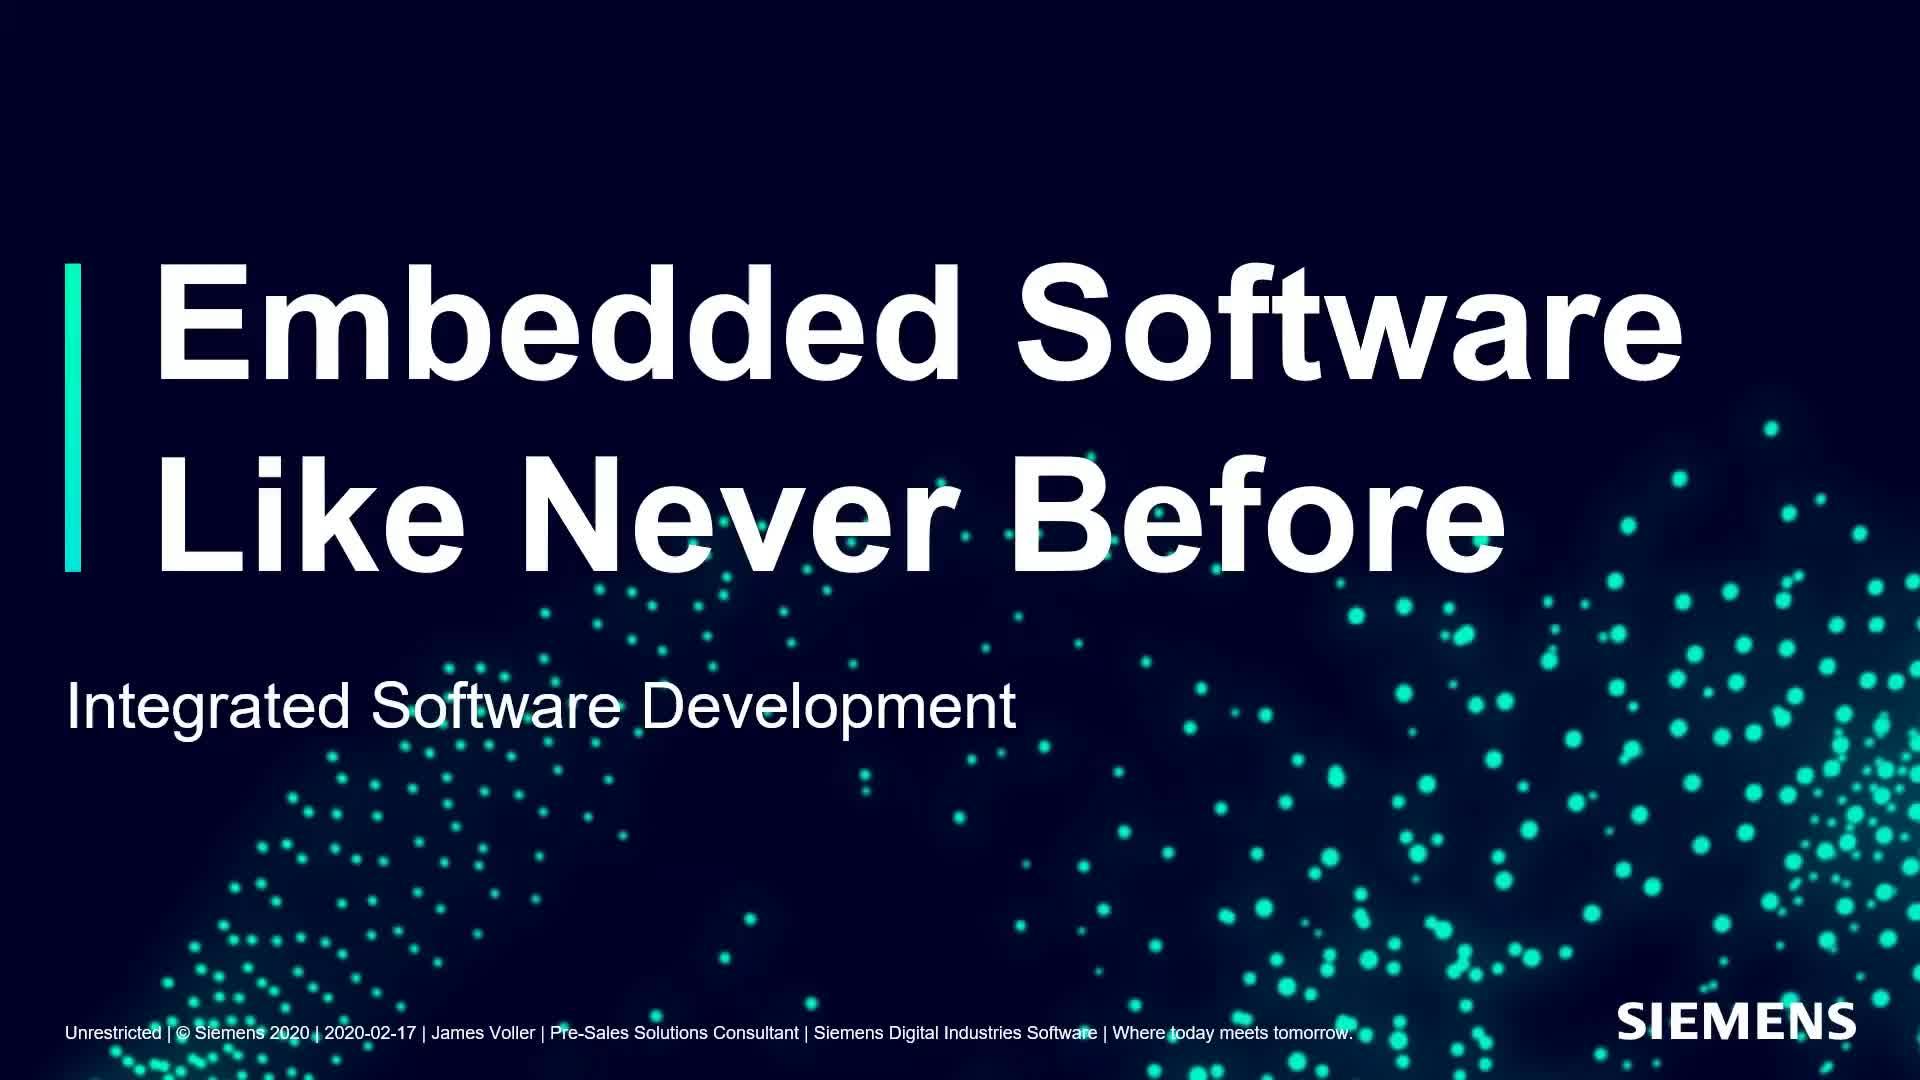 The Next Level of Embedded Software Development